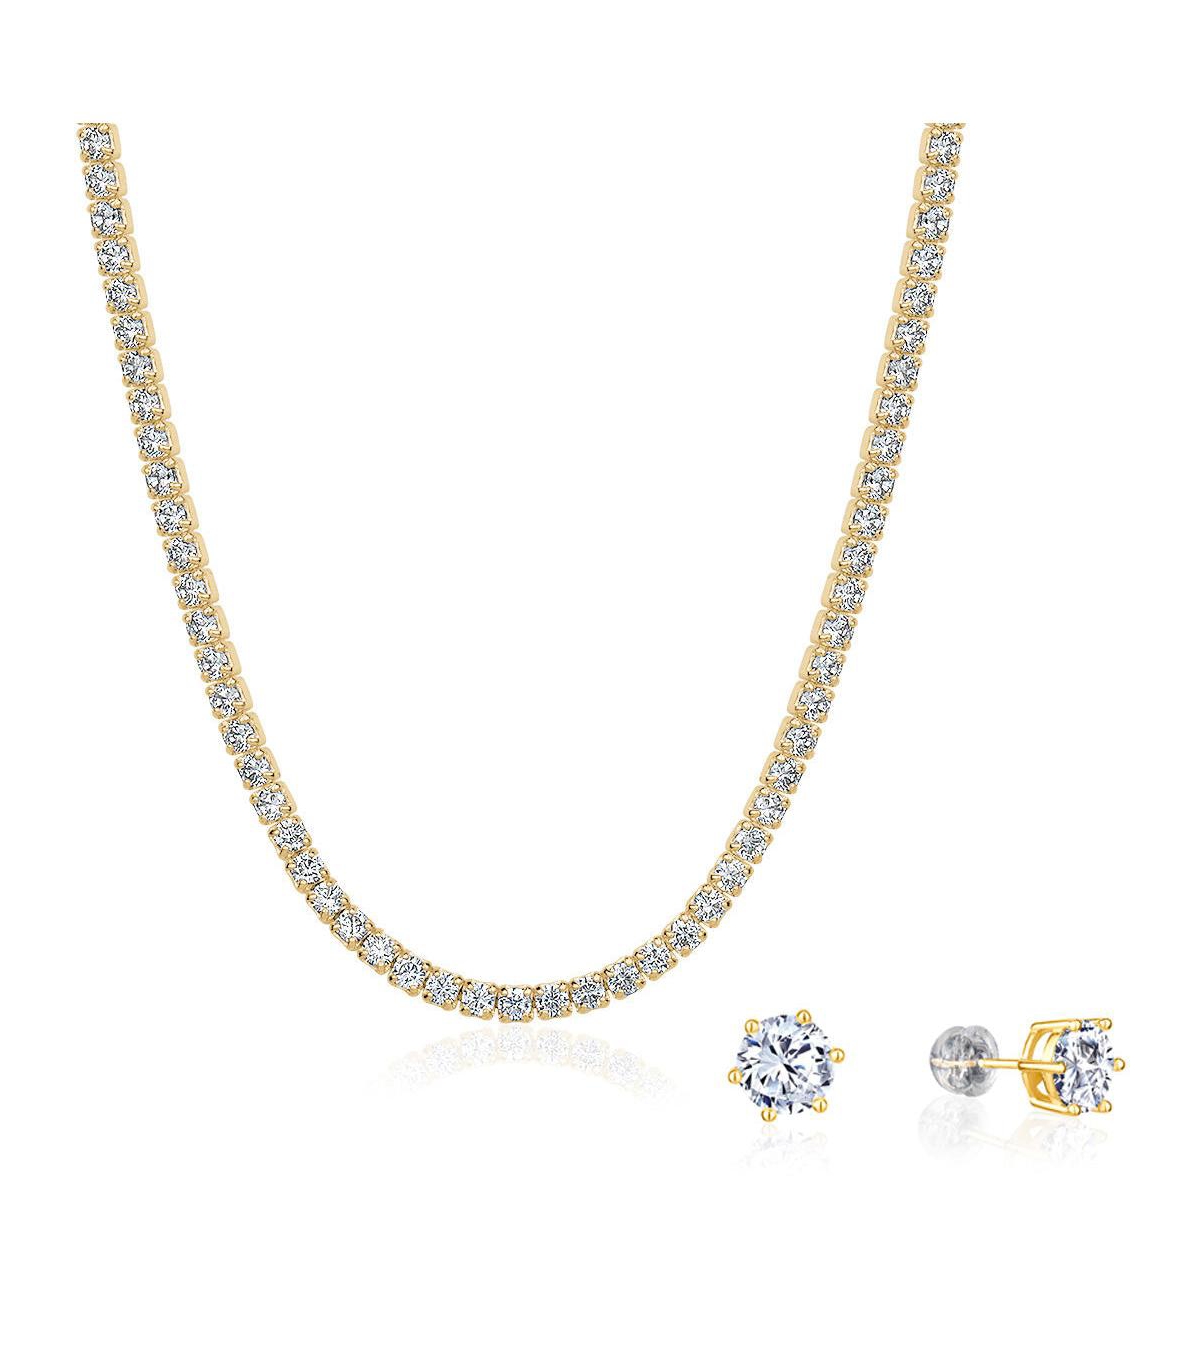 5A Cubic Zirconia Tennis Necklace and 7mm Stud Earrings Set (18K Gold) - Gold